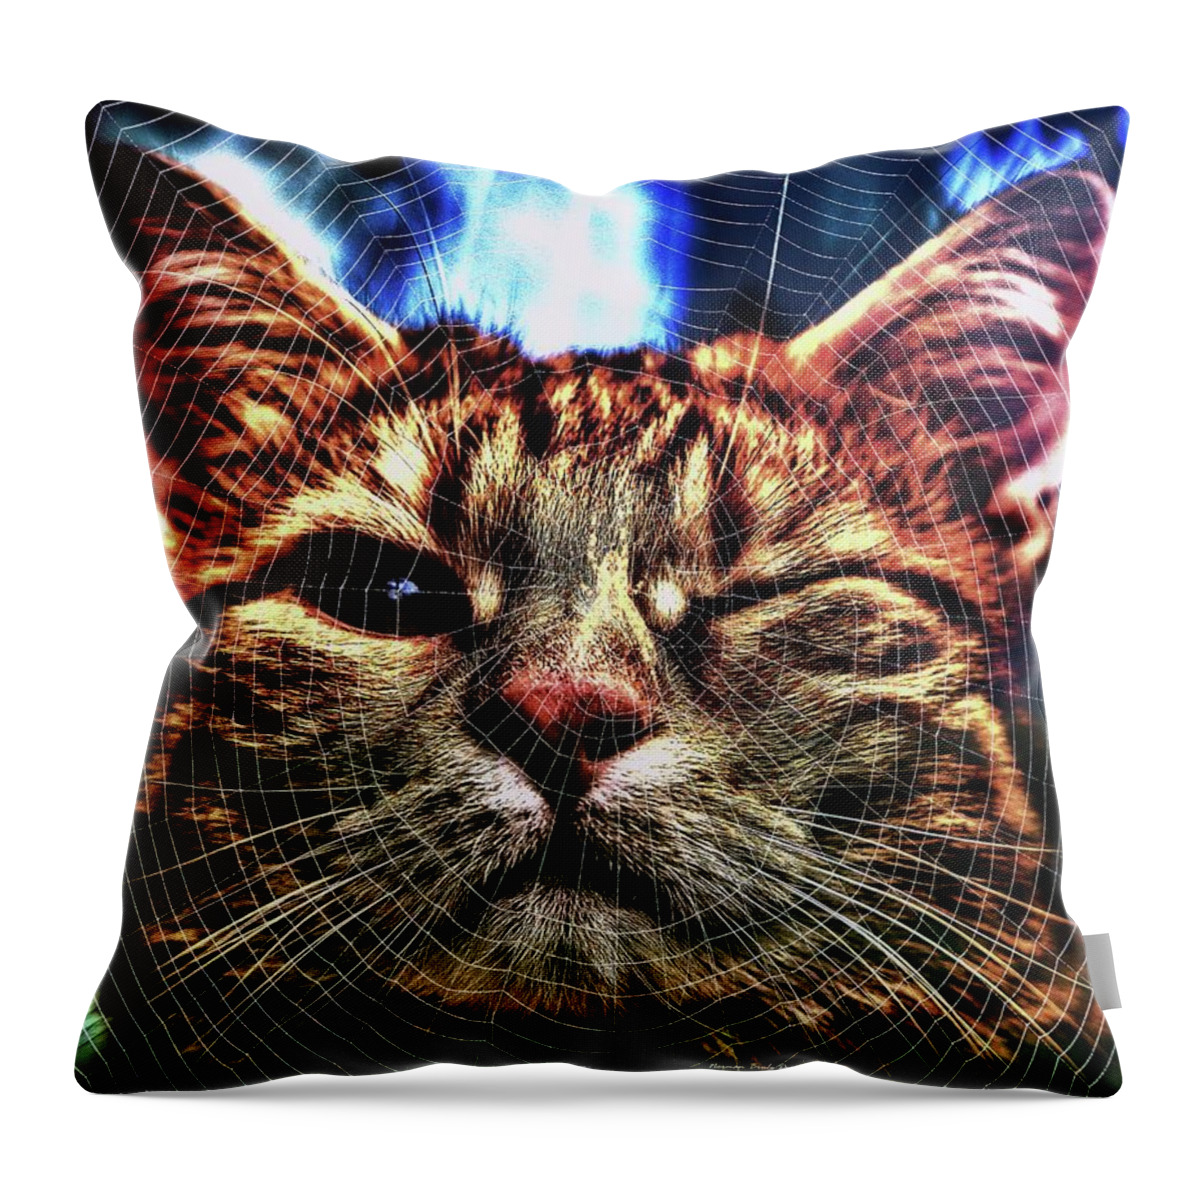 Spider Throw Pillow featuring the digital art Curious by Norman Brule